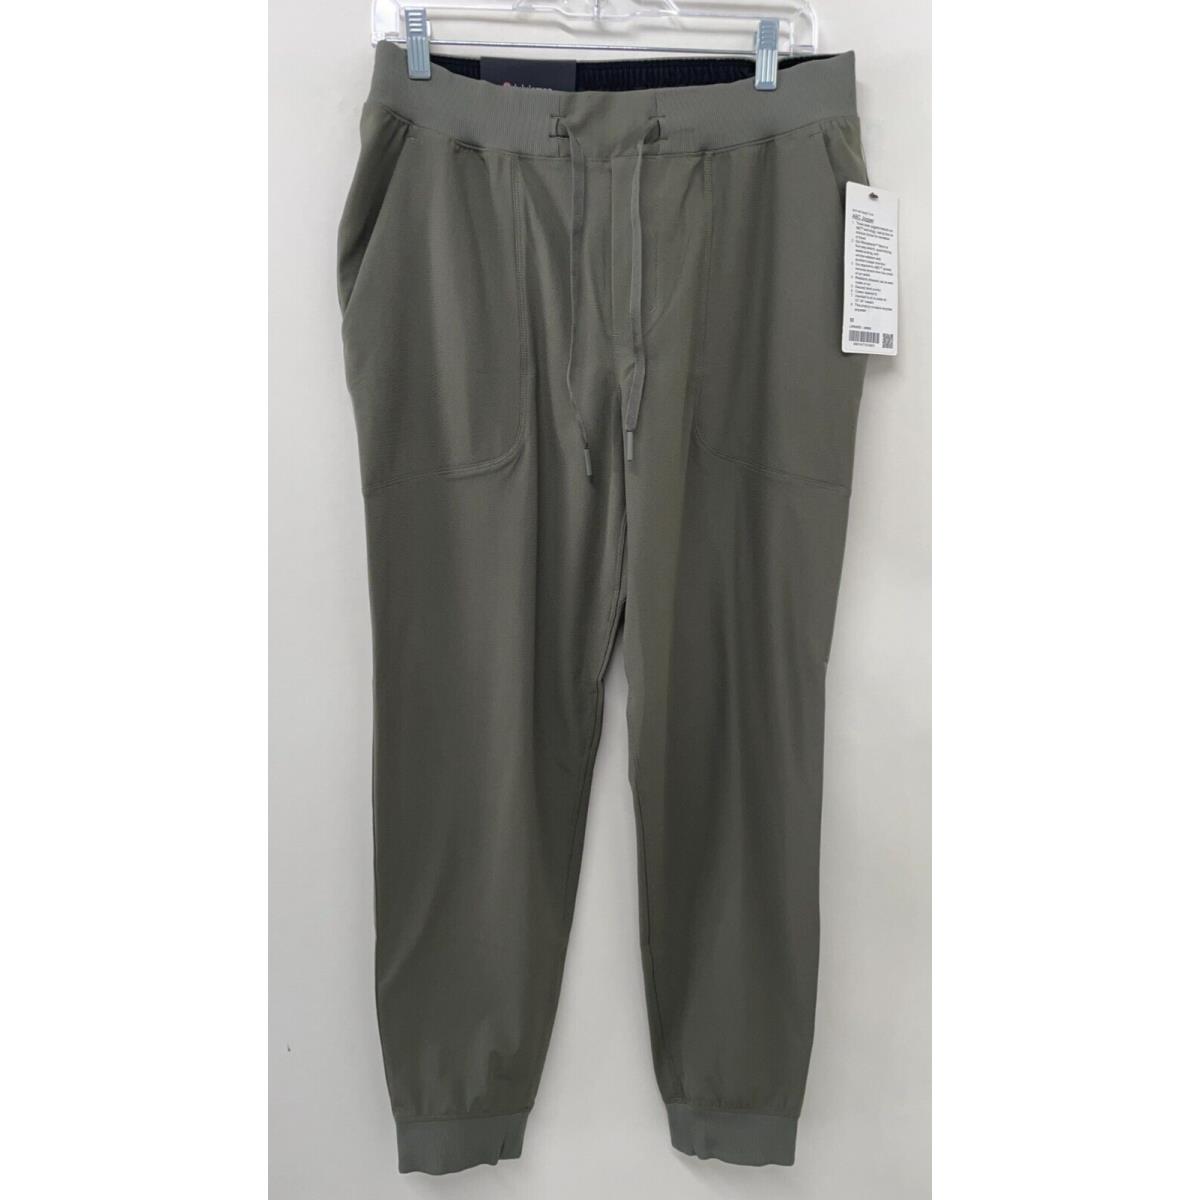 Lululemon Mens M Abc Jogger Army Green Tapered Wrinkle-resistant Stretch LM5AMZS